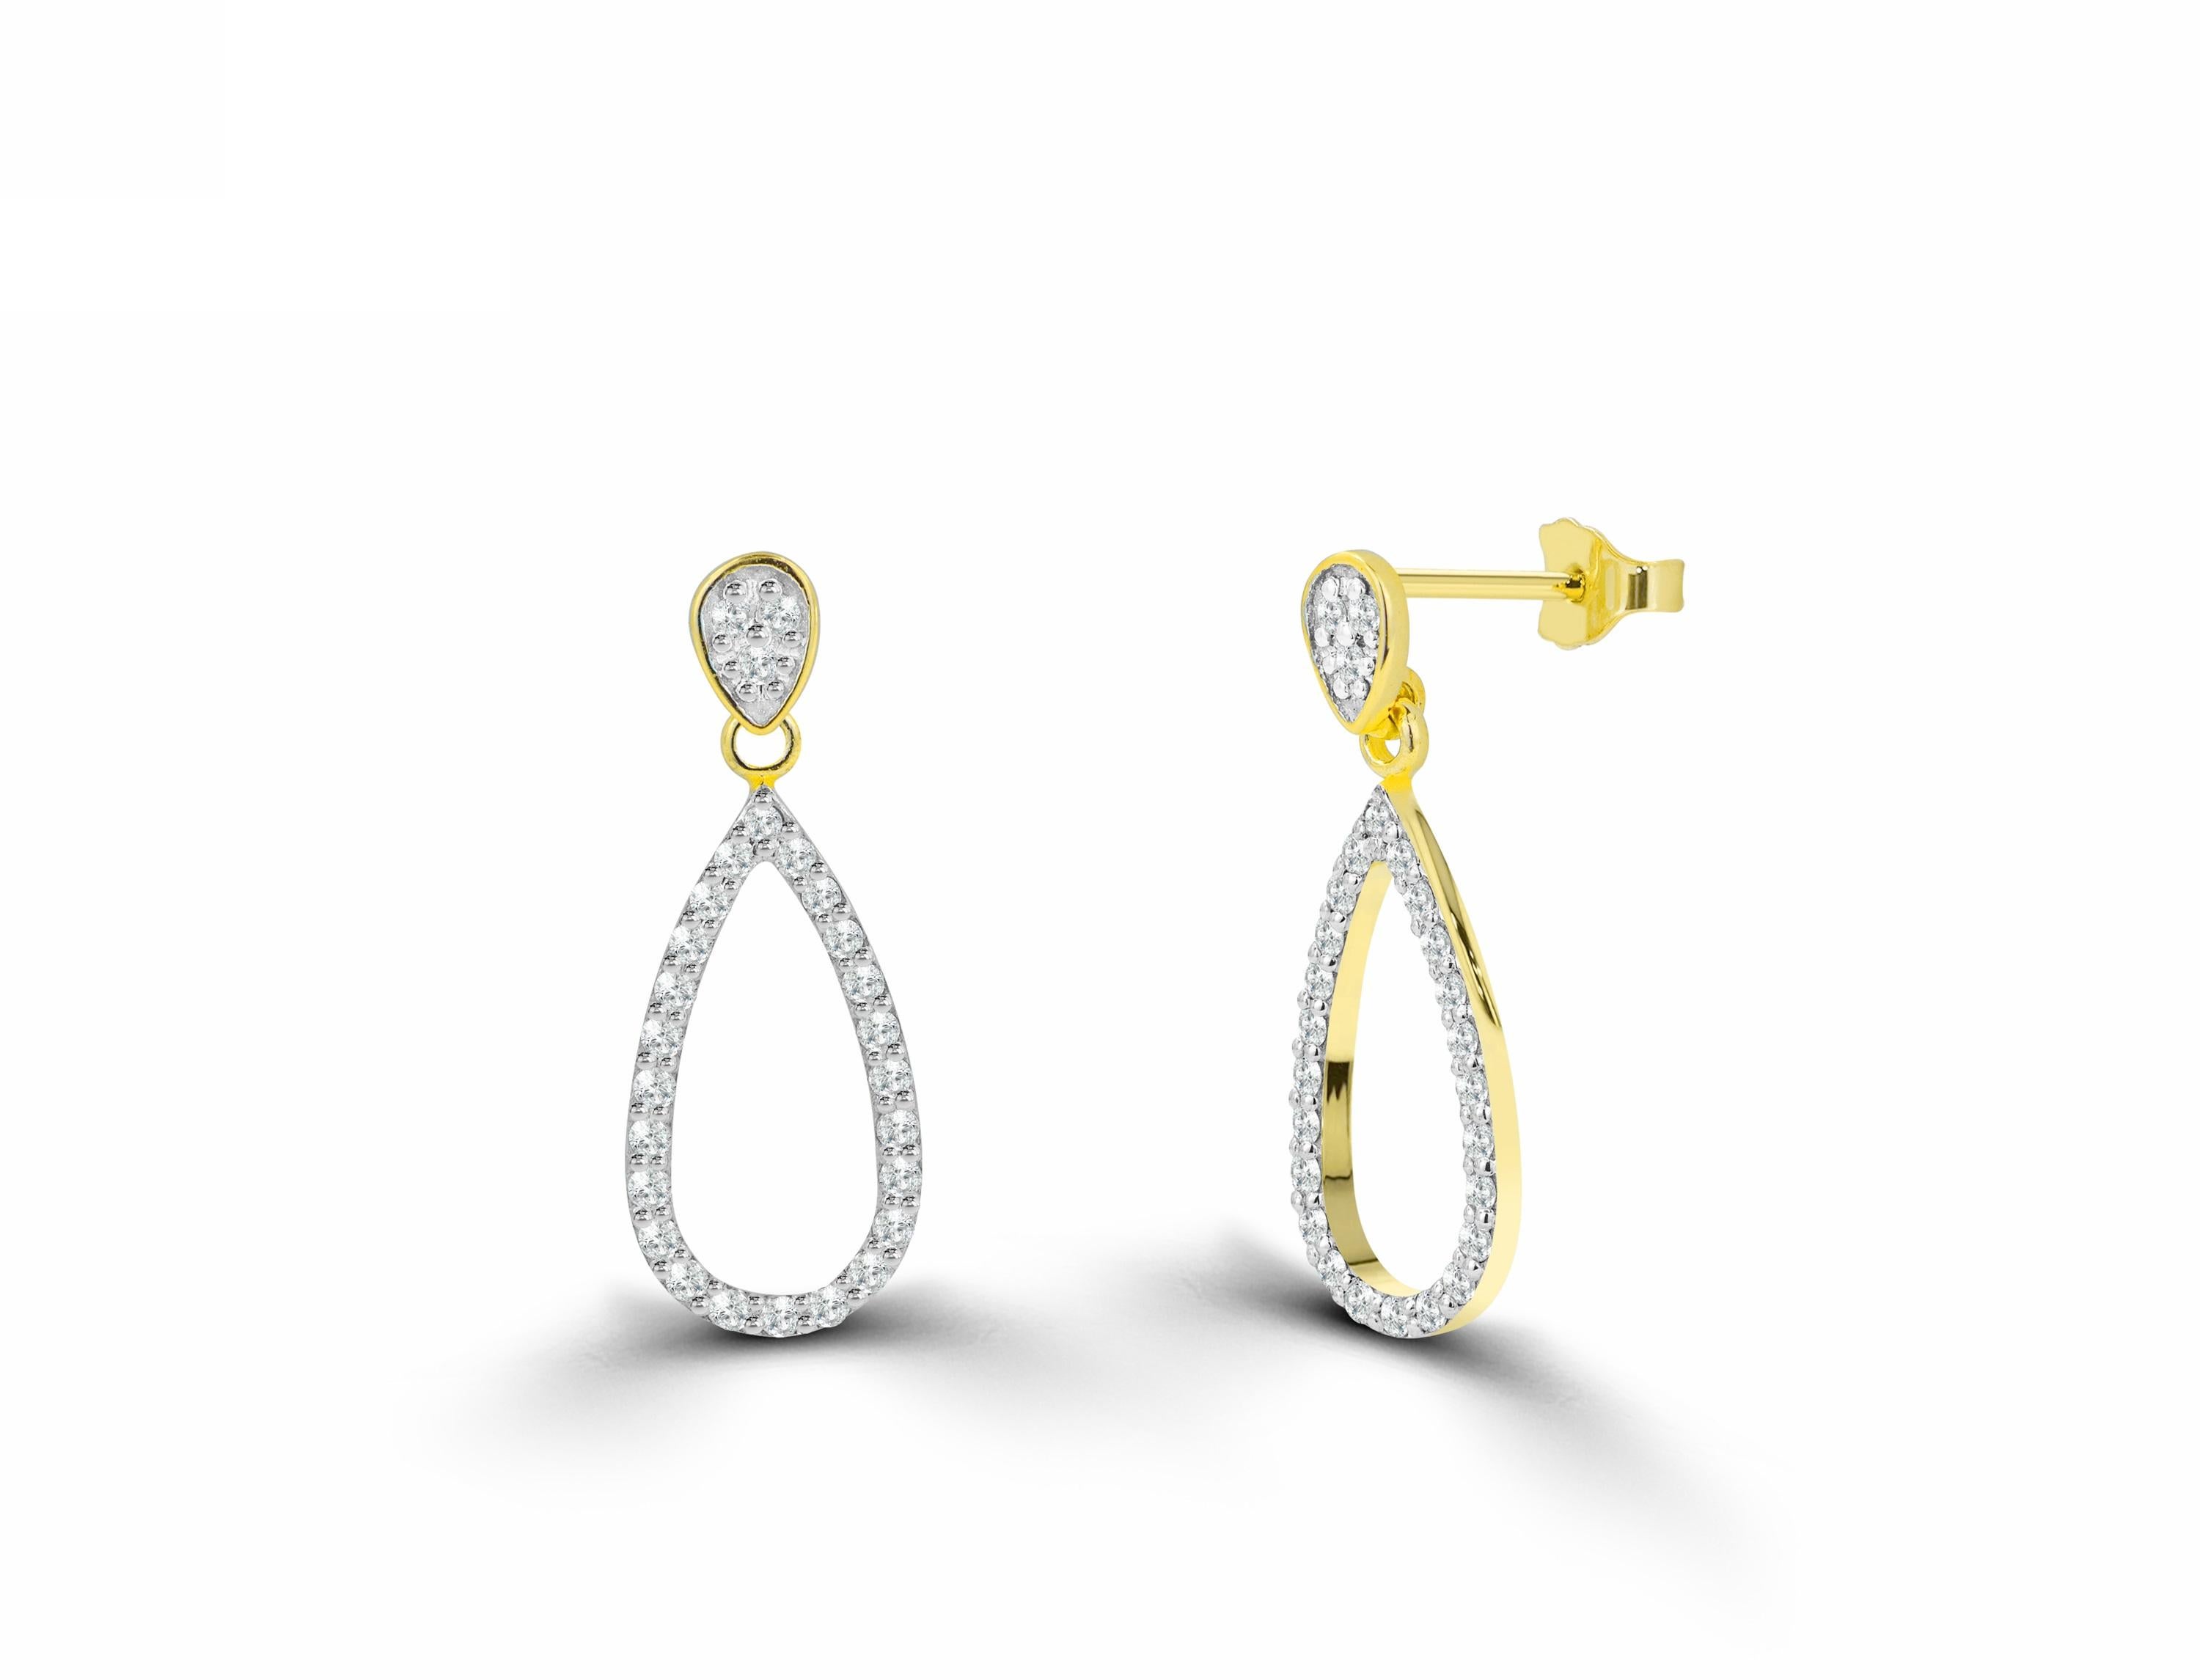 Diamond Teardrop Stud Earrings in 14k Rose Gold, Yellow Gold, White Gold.

These Dainty Stud Earrings are made of 14k solid gold featuring shiny brilliant round cut natural diamonds set by master setter in our studio. Simple but unique, elegant and